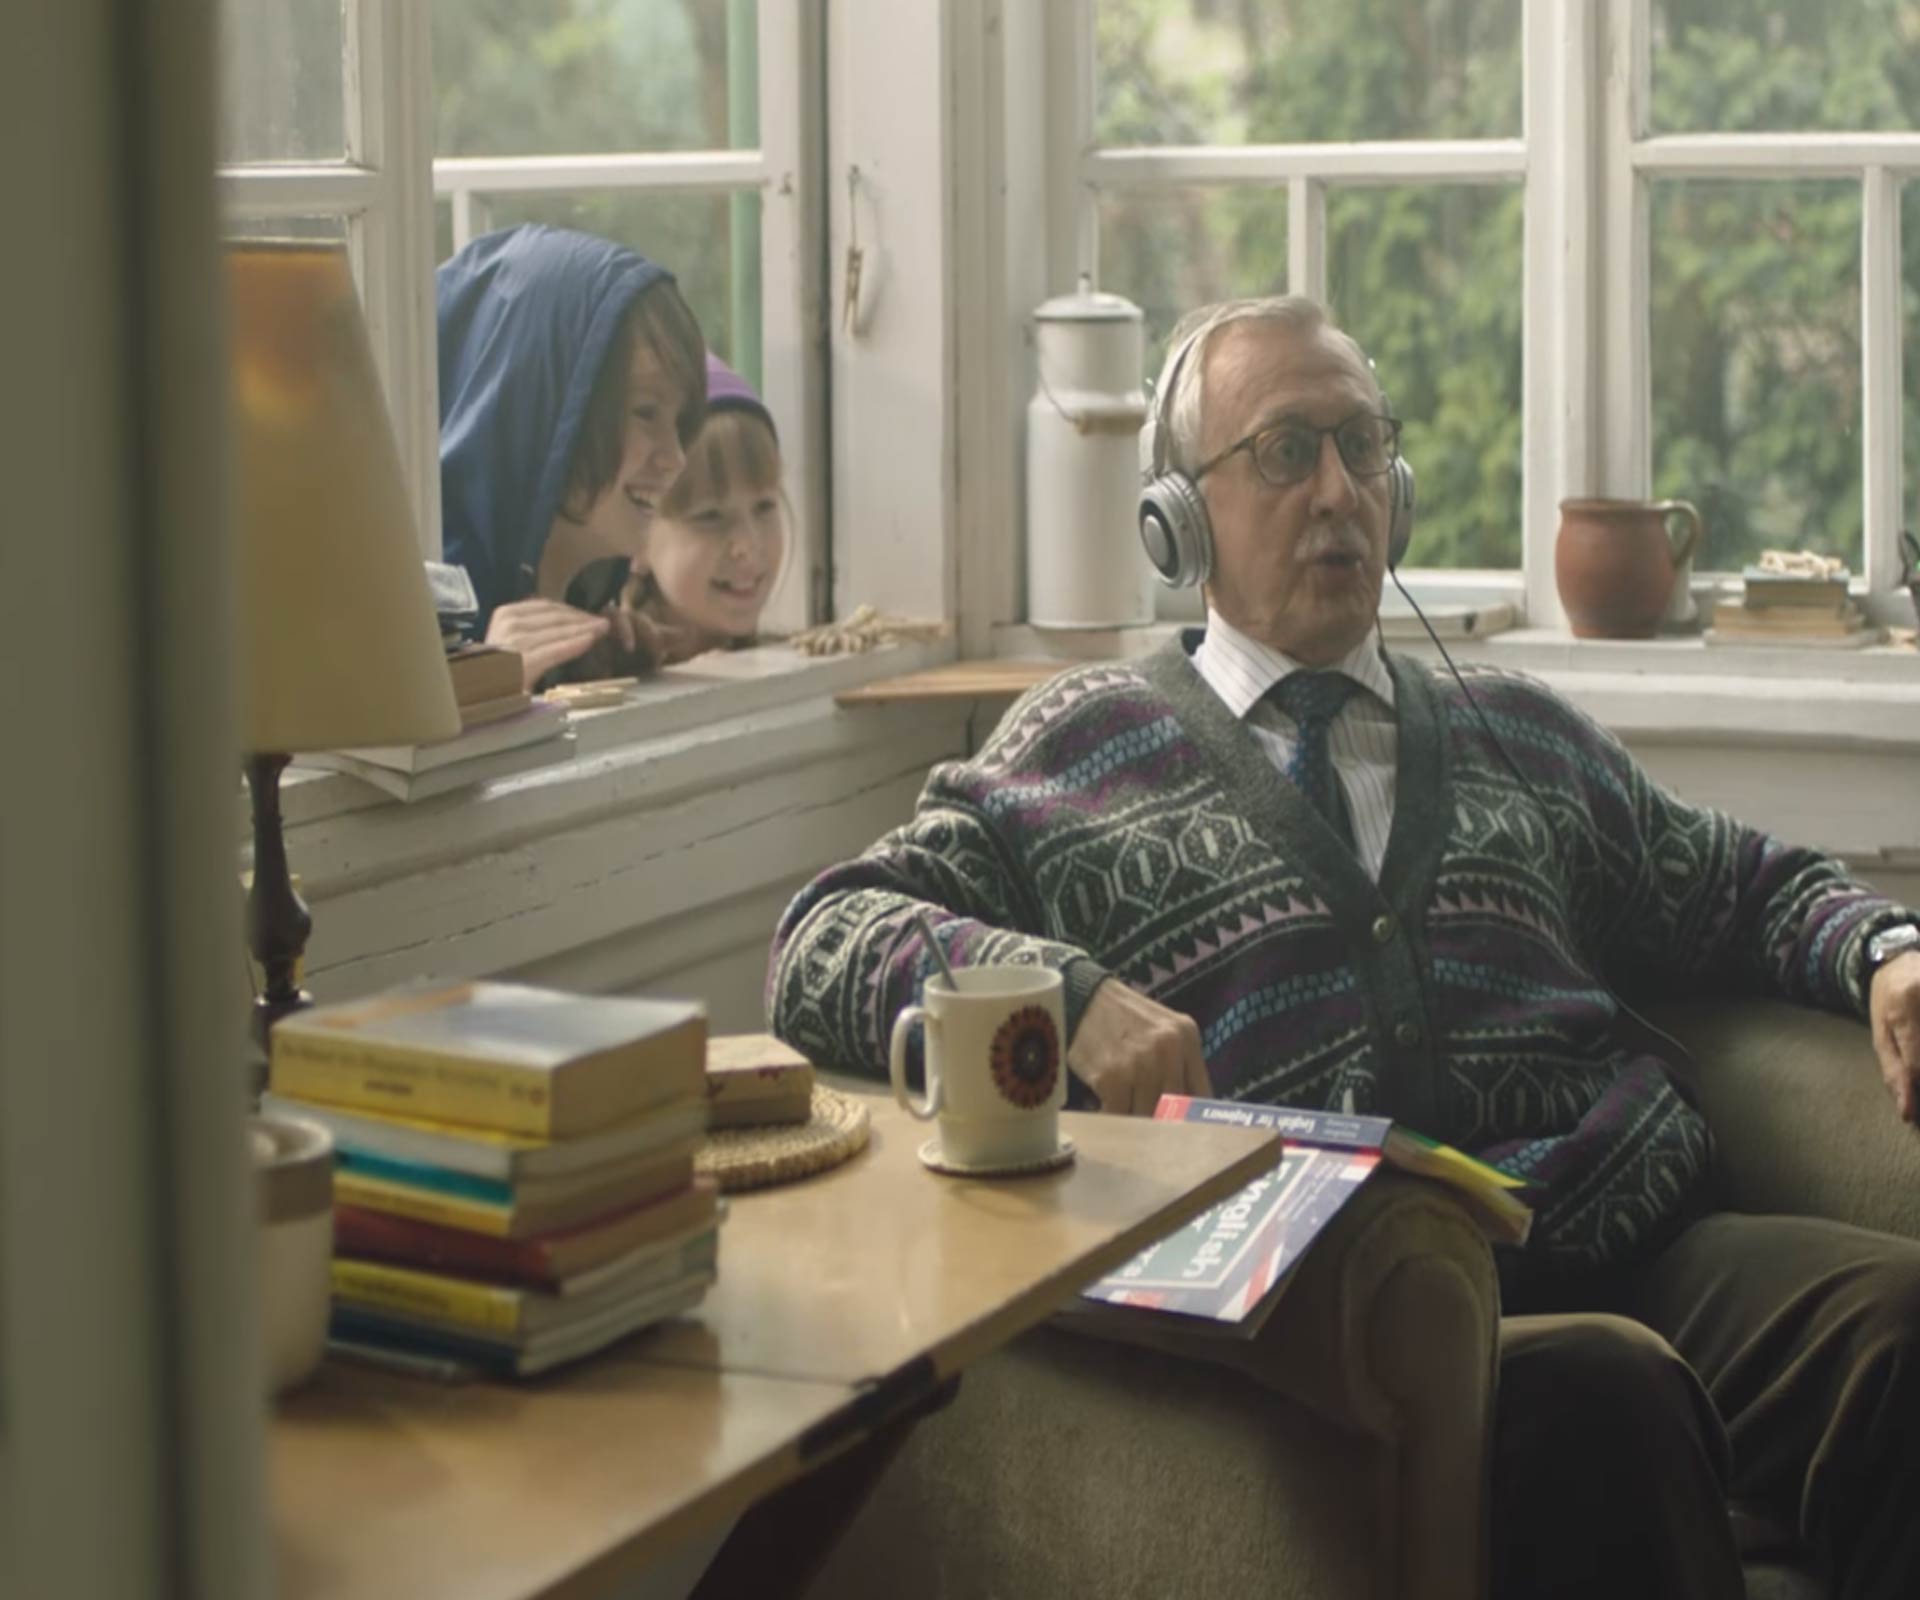 This Polish Christmas ad is going viral, and it’s not hard to see why